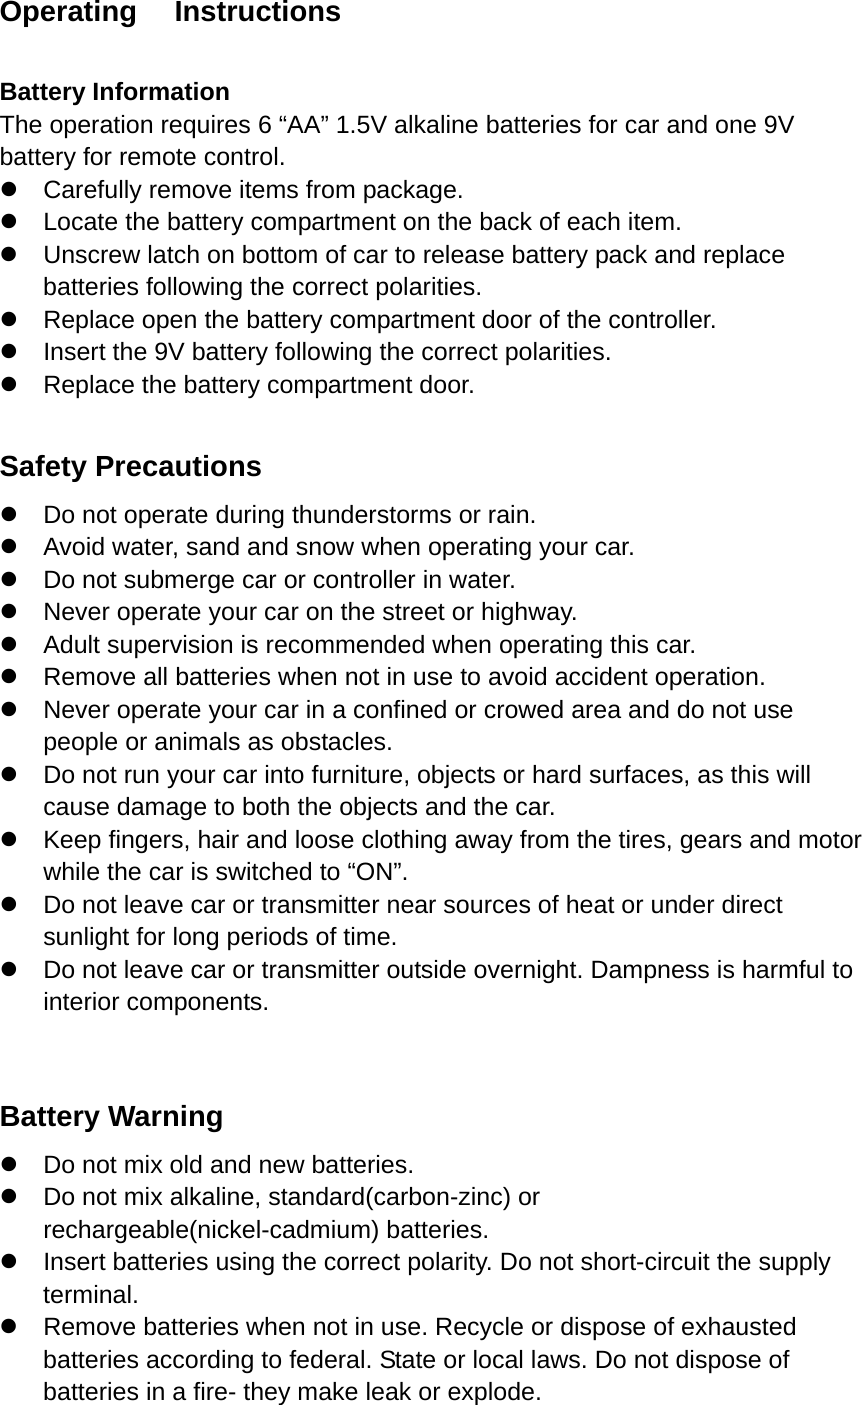 Operating   Instructions  Battery Information The operation requires 6 “AA” 1.5V alkaline batteries for car and one 9V battery for remote control. z  Carefully remove items from package. z  Locate the battery compartment on the back of each item. z  Unscrew latch on bottom of car to release battery pack and replace batteries following the correct polarities. z  Replace open the battery compartment door of the controller. z  Insert the 9V battery following the correct polarities. z  Replace the battery compartment door.  Safety Precautions z  Do not operate during thunderstorms or rain. z  Avoid water, sand and snow when operating your car. z  Do not submerge car or controller in water. z  Never operate your car on the street or highway. z  Adult supervision is recommended when operating this car. z  Remove all batteries when not in use to avoid accident operation. z  Never operate your car in a confined or crowed area and do not use people or animals as obstacles. z  Do not run your car into furniture, objects or hard surfaces, as this will cause damage to both the objects and the car. z  Keep fingers, hair and loose clothing away from the tires, gears and motor while the car is switched to “ON”. z  Do not leave car or transmitter near sources of heat or under direct sunlight for long periods of time. z  Do not leave car or transmitter outside overnight. Dampness is harmful to interior components.  Battery Warning z  Do not mix old and new batteries. z  Do not mix alkaline, standard(carbon-zinc) or rechargeable(nickel-cadmium) batteries. z  Insert batteries using the correct polarity. Do not short-circuit the supply terminal. z  Remove batteries when not in use. Recycle or dispose of exhausted batteries according to federal. State or local laws. Do not dispose of batteries in a fire- they make leak or explode. 